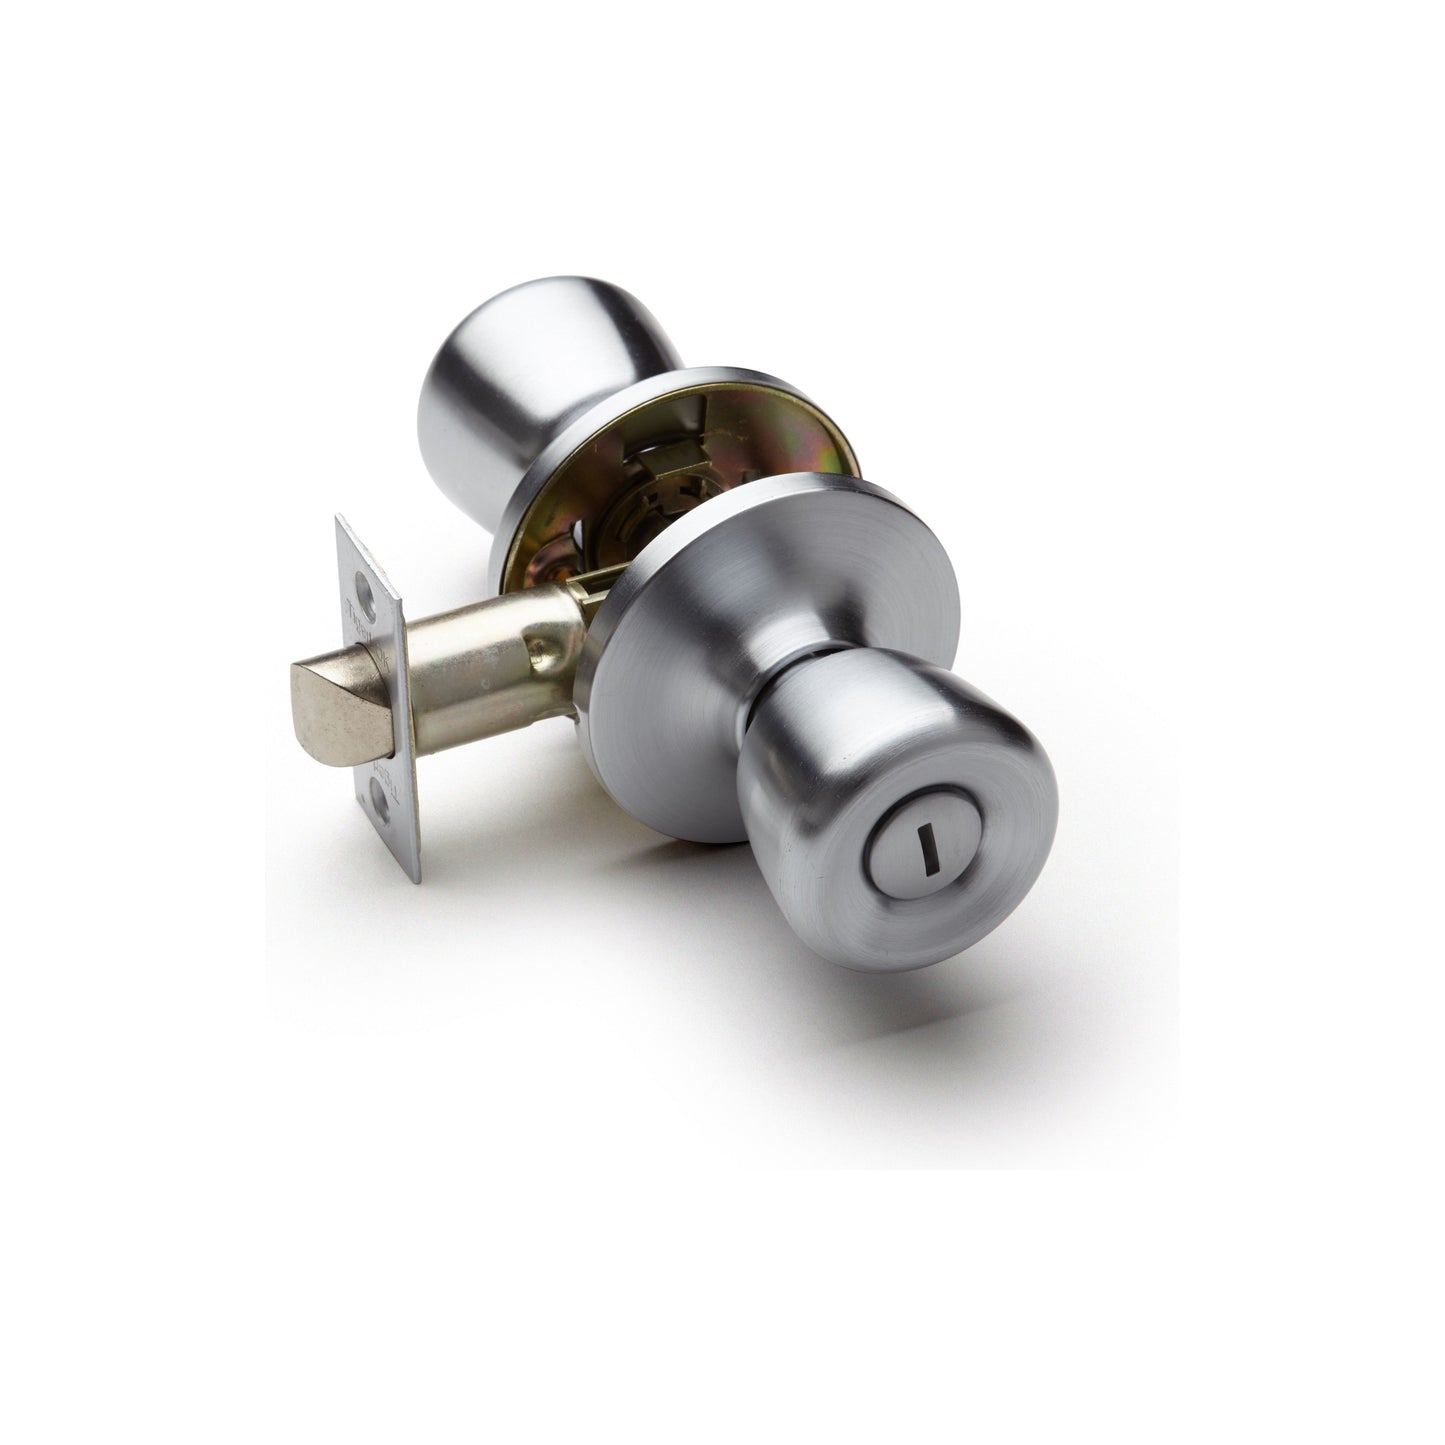 PRIVACY MAXIMUM SECURITY LOCKSET - STAINLESS STEEL